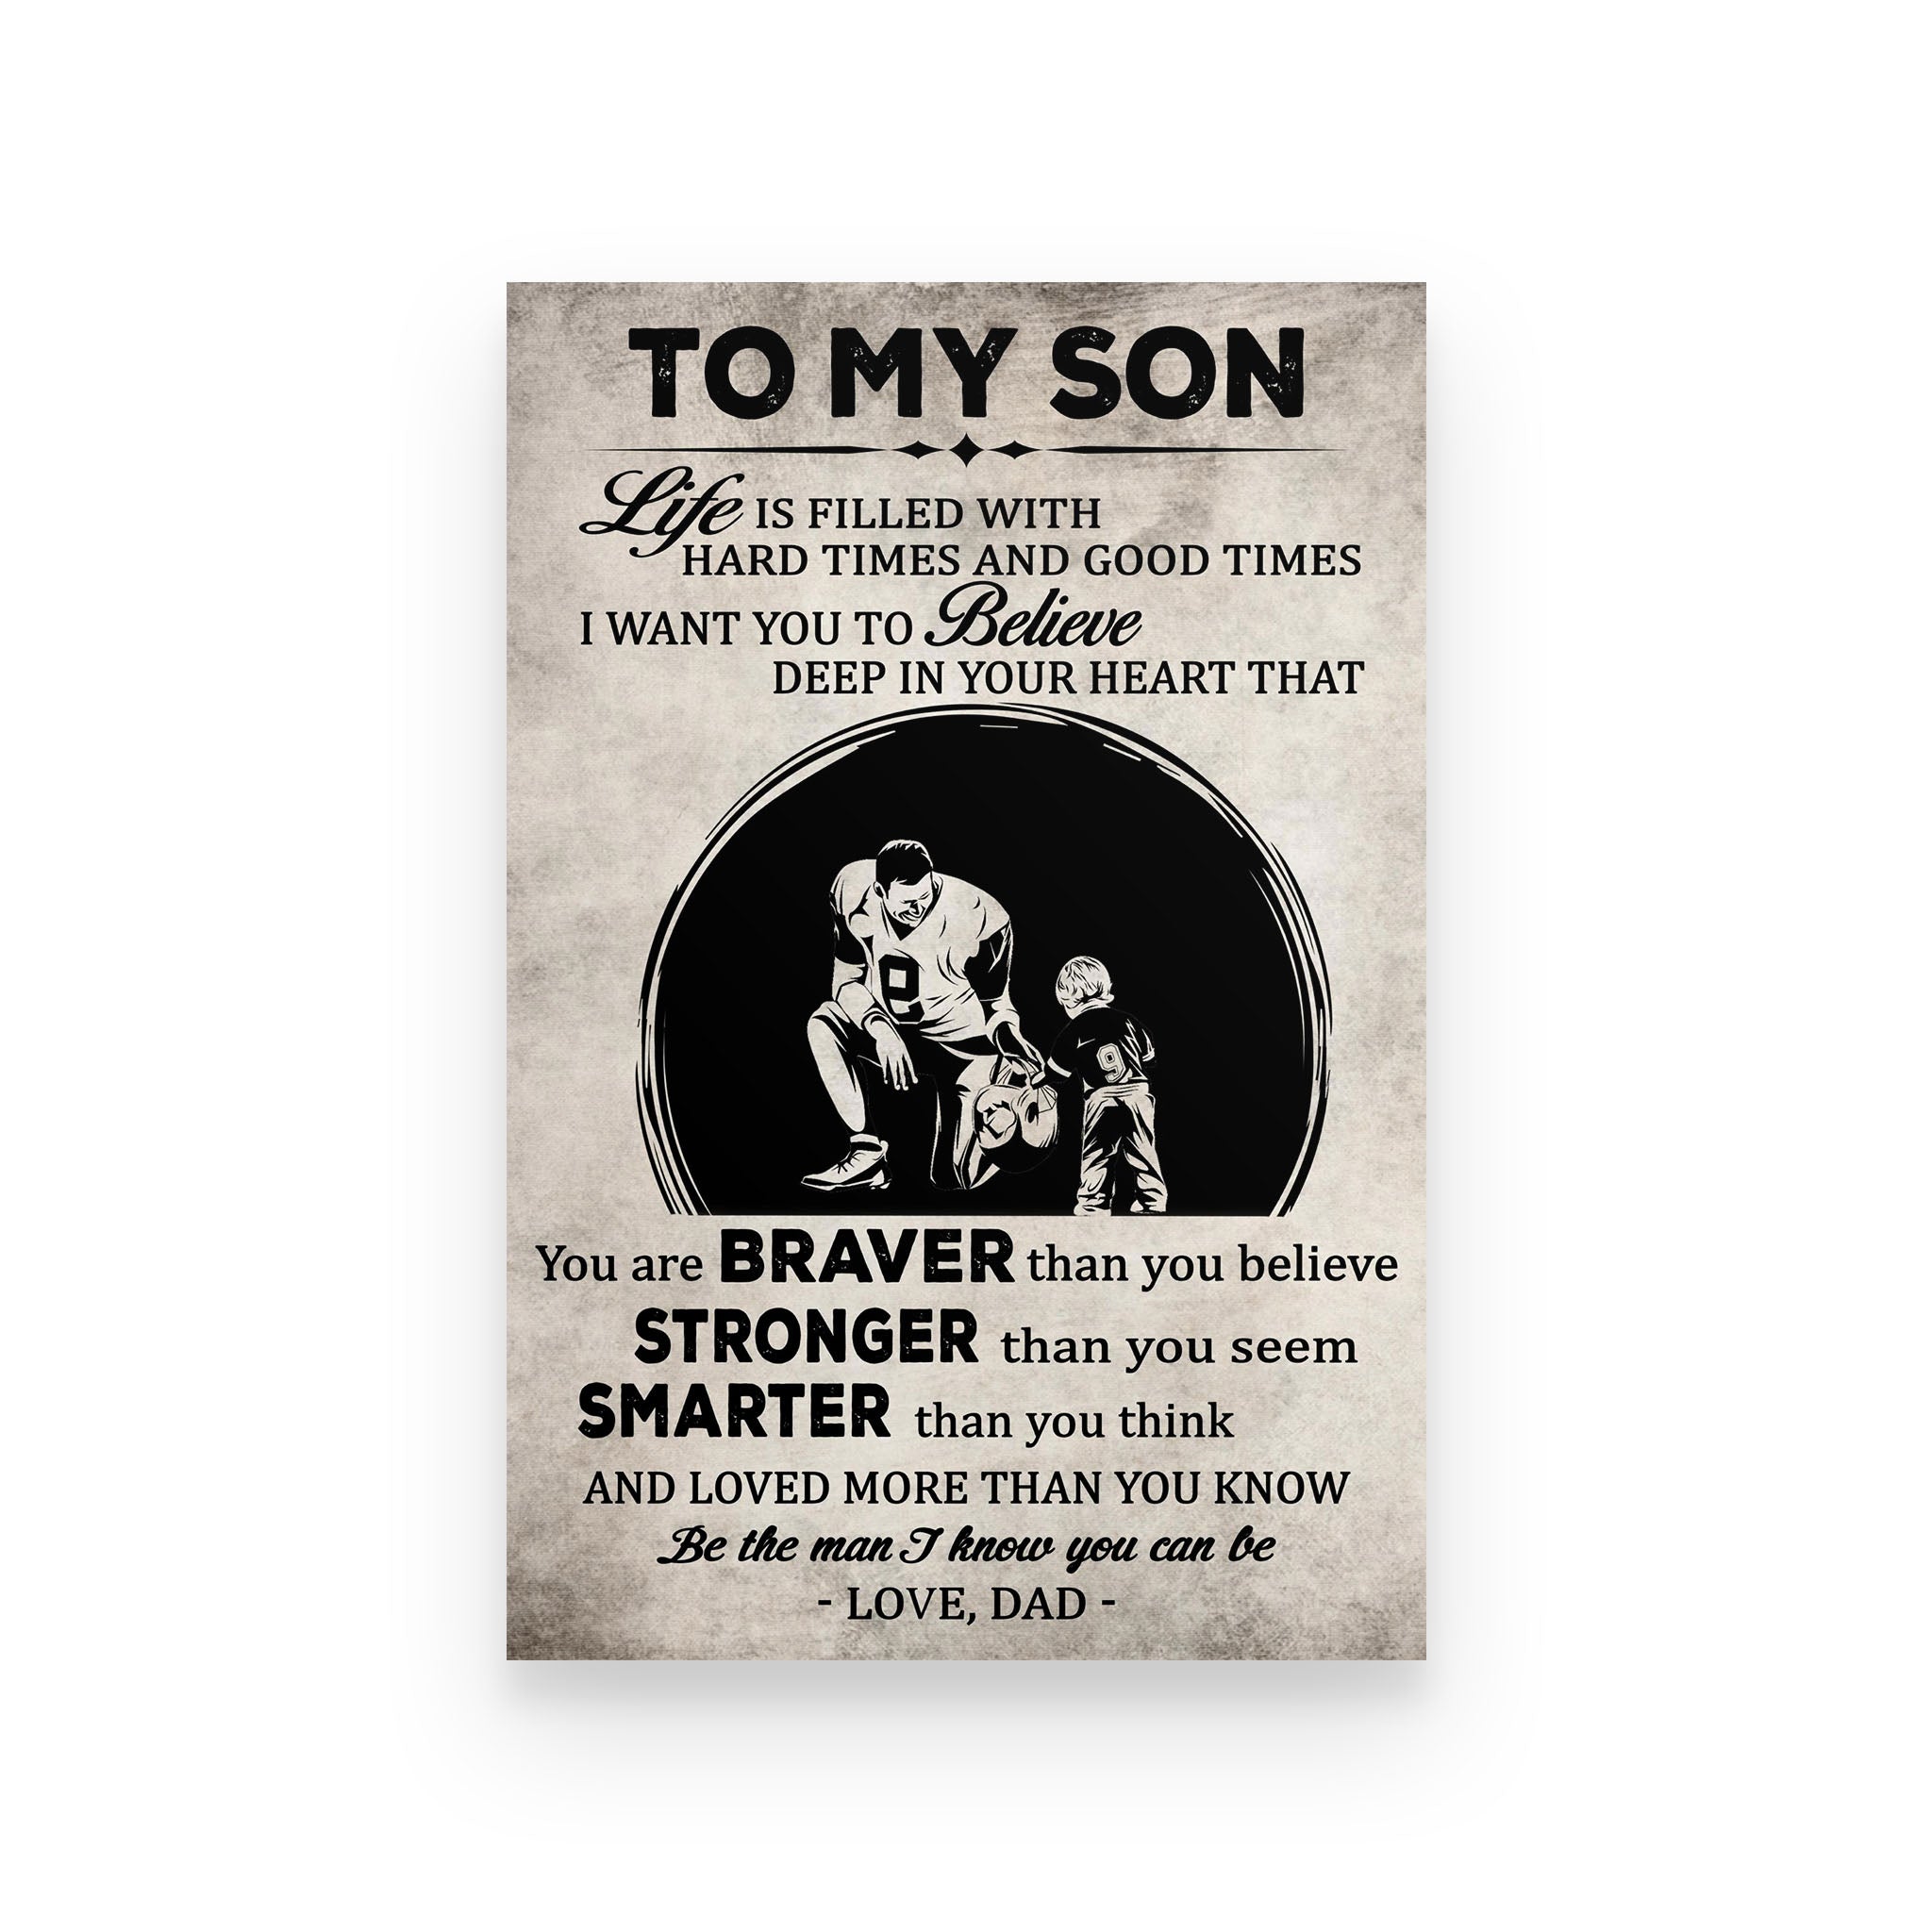 American football poster dad to son life is filled with hard times and good times